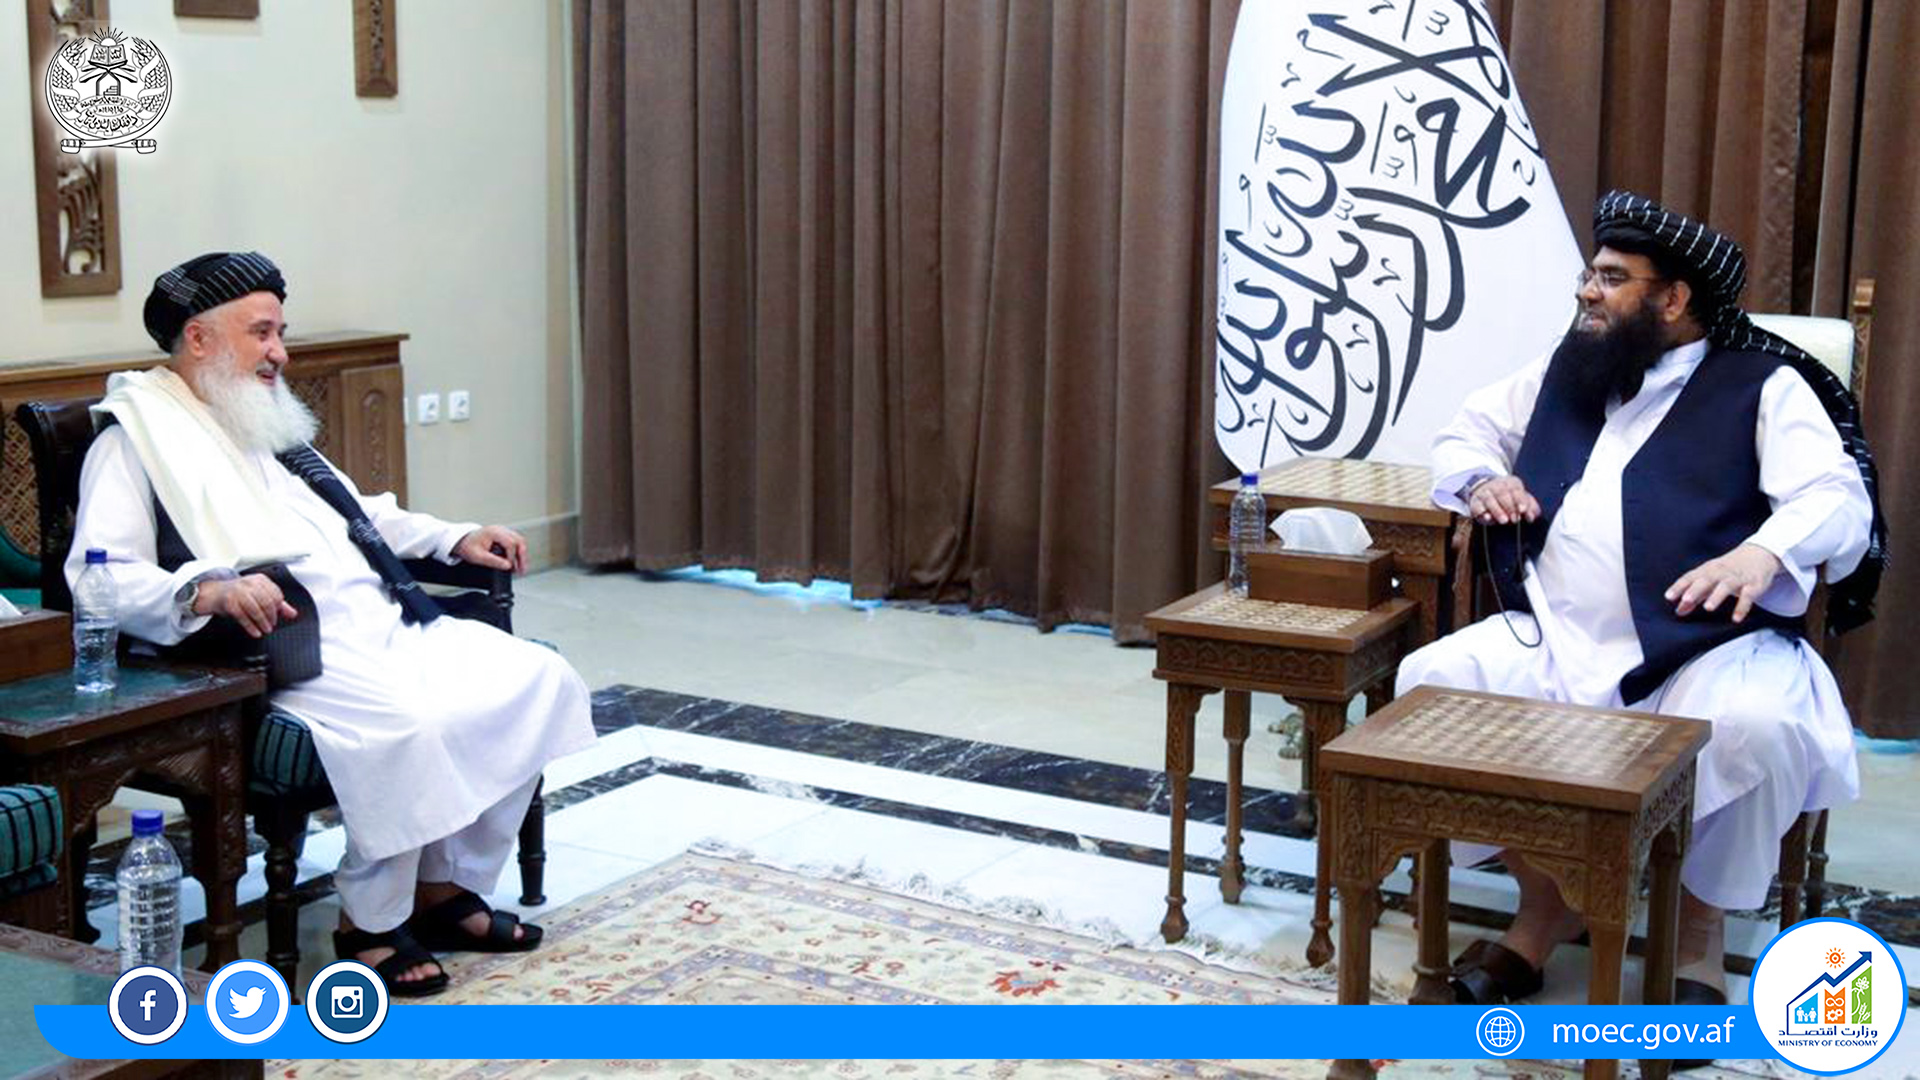 Maulvi Abdul Kabir, the political assistant and acting prime minister of the Islamic Emirate of Afghanistan, met with Qari Din Muhammad Hanif, acting minister of the Ministry of Economy, on Tuesday, which coincided with May 23, 2023.